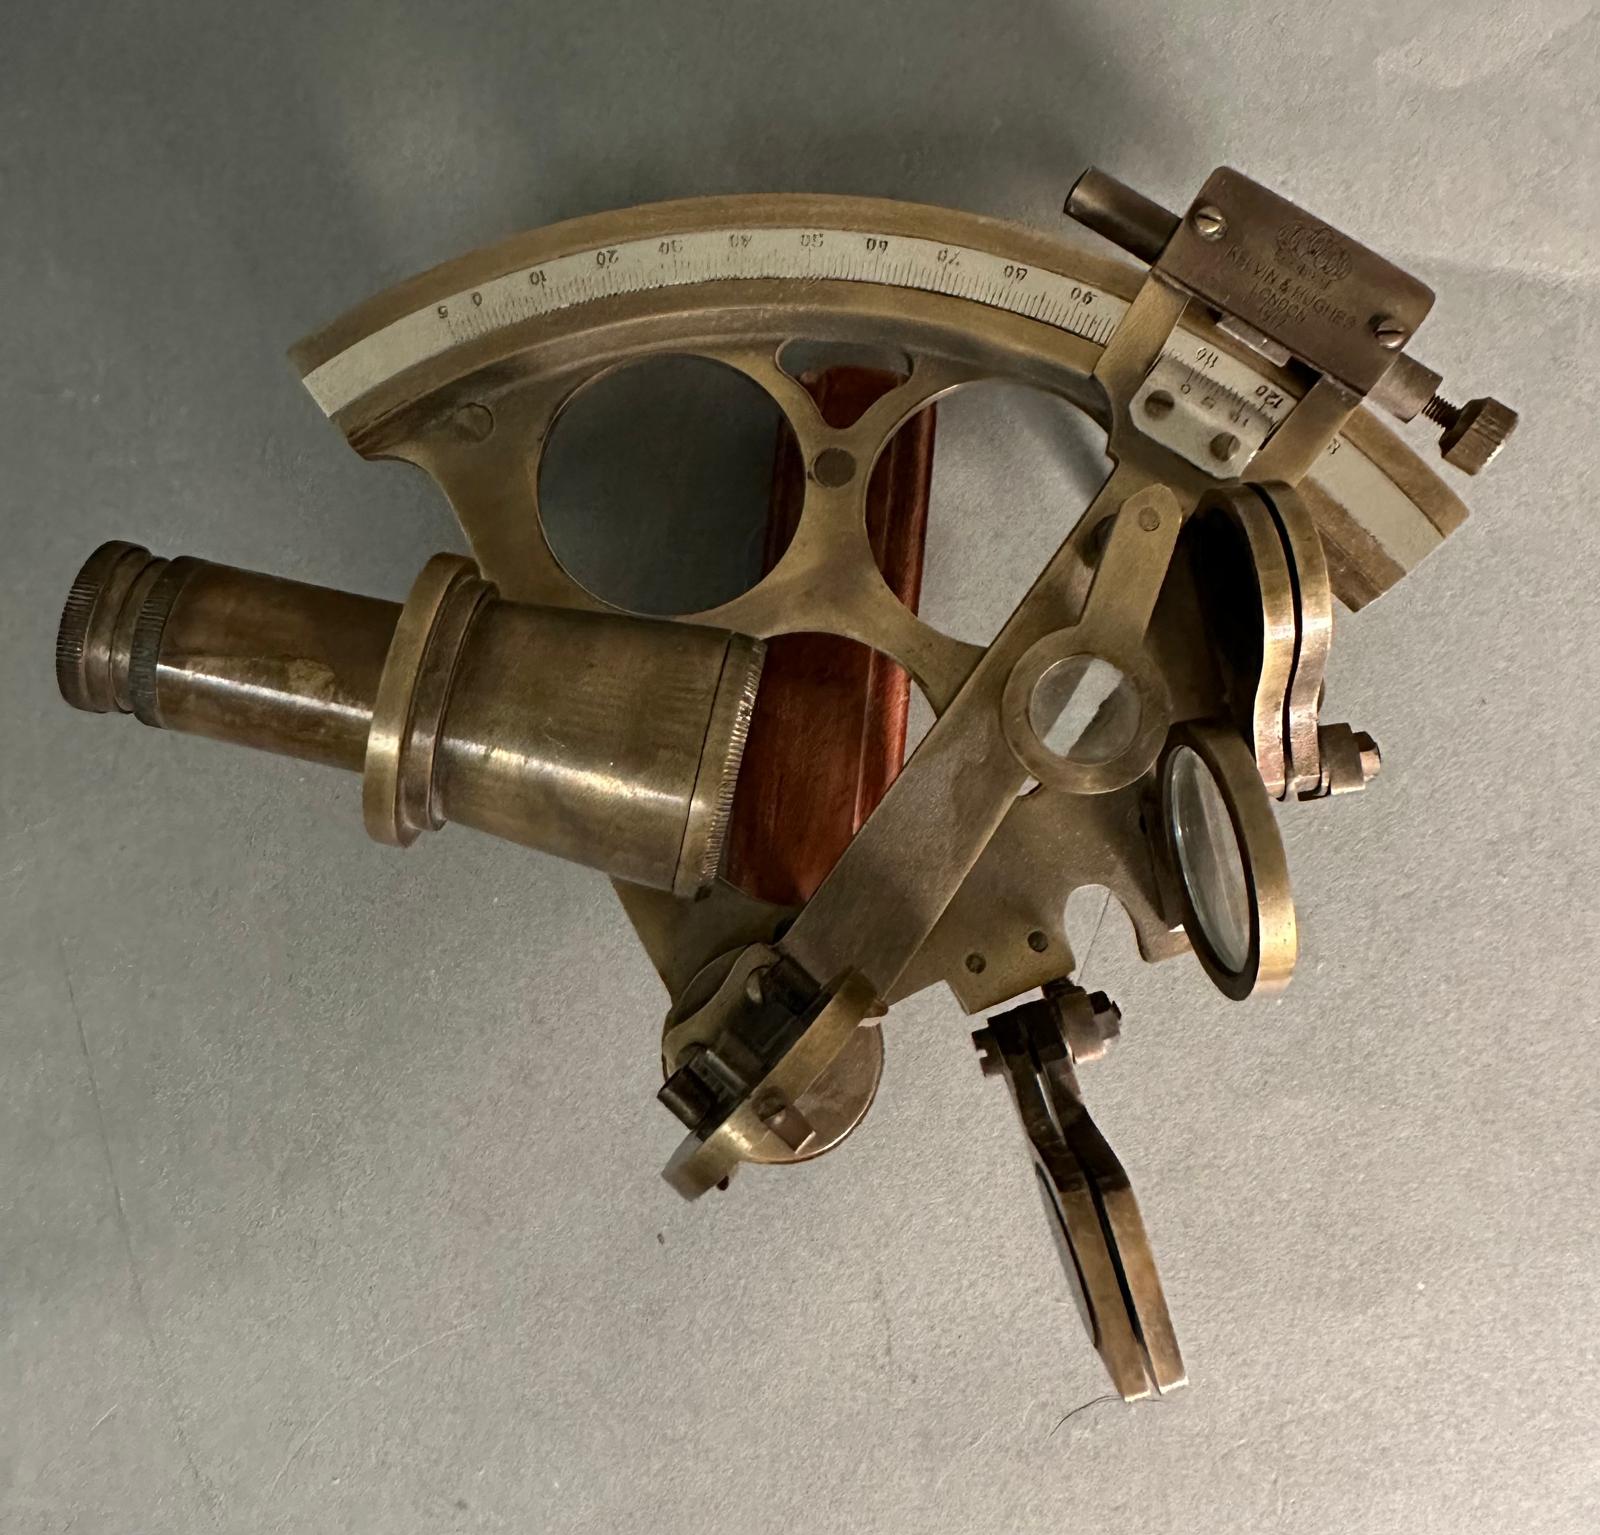 A vintage brass sextant by Kelvin and Hughs on London stamped 1917